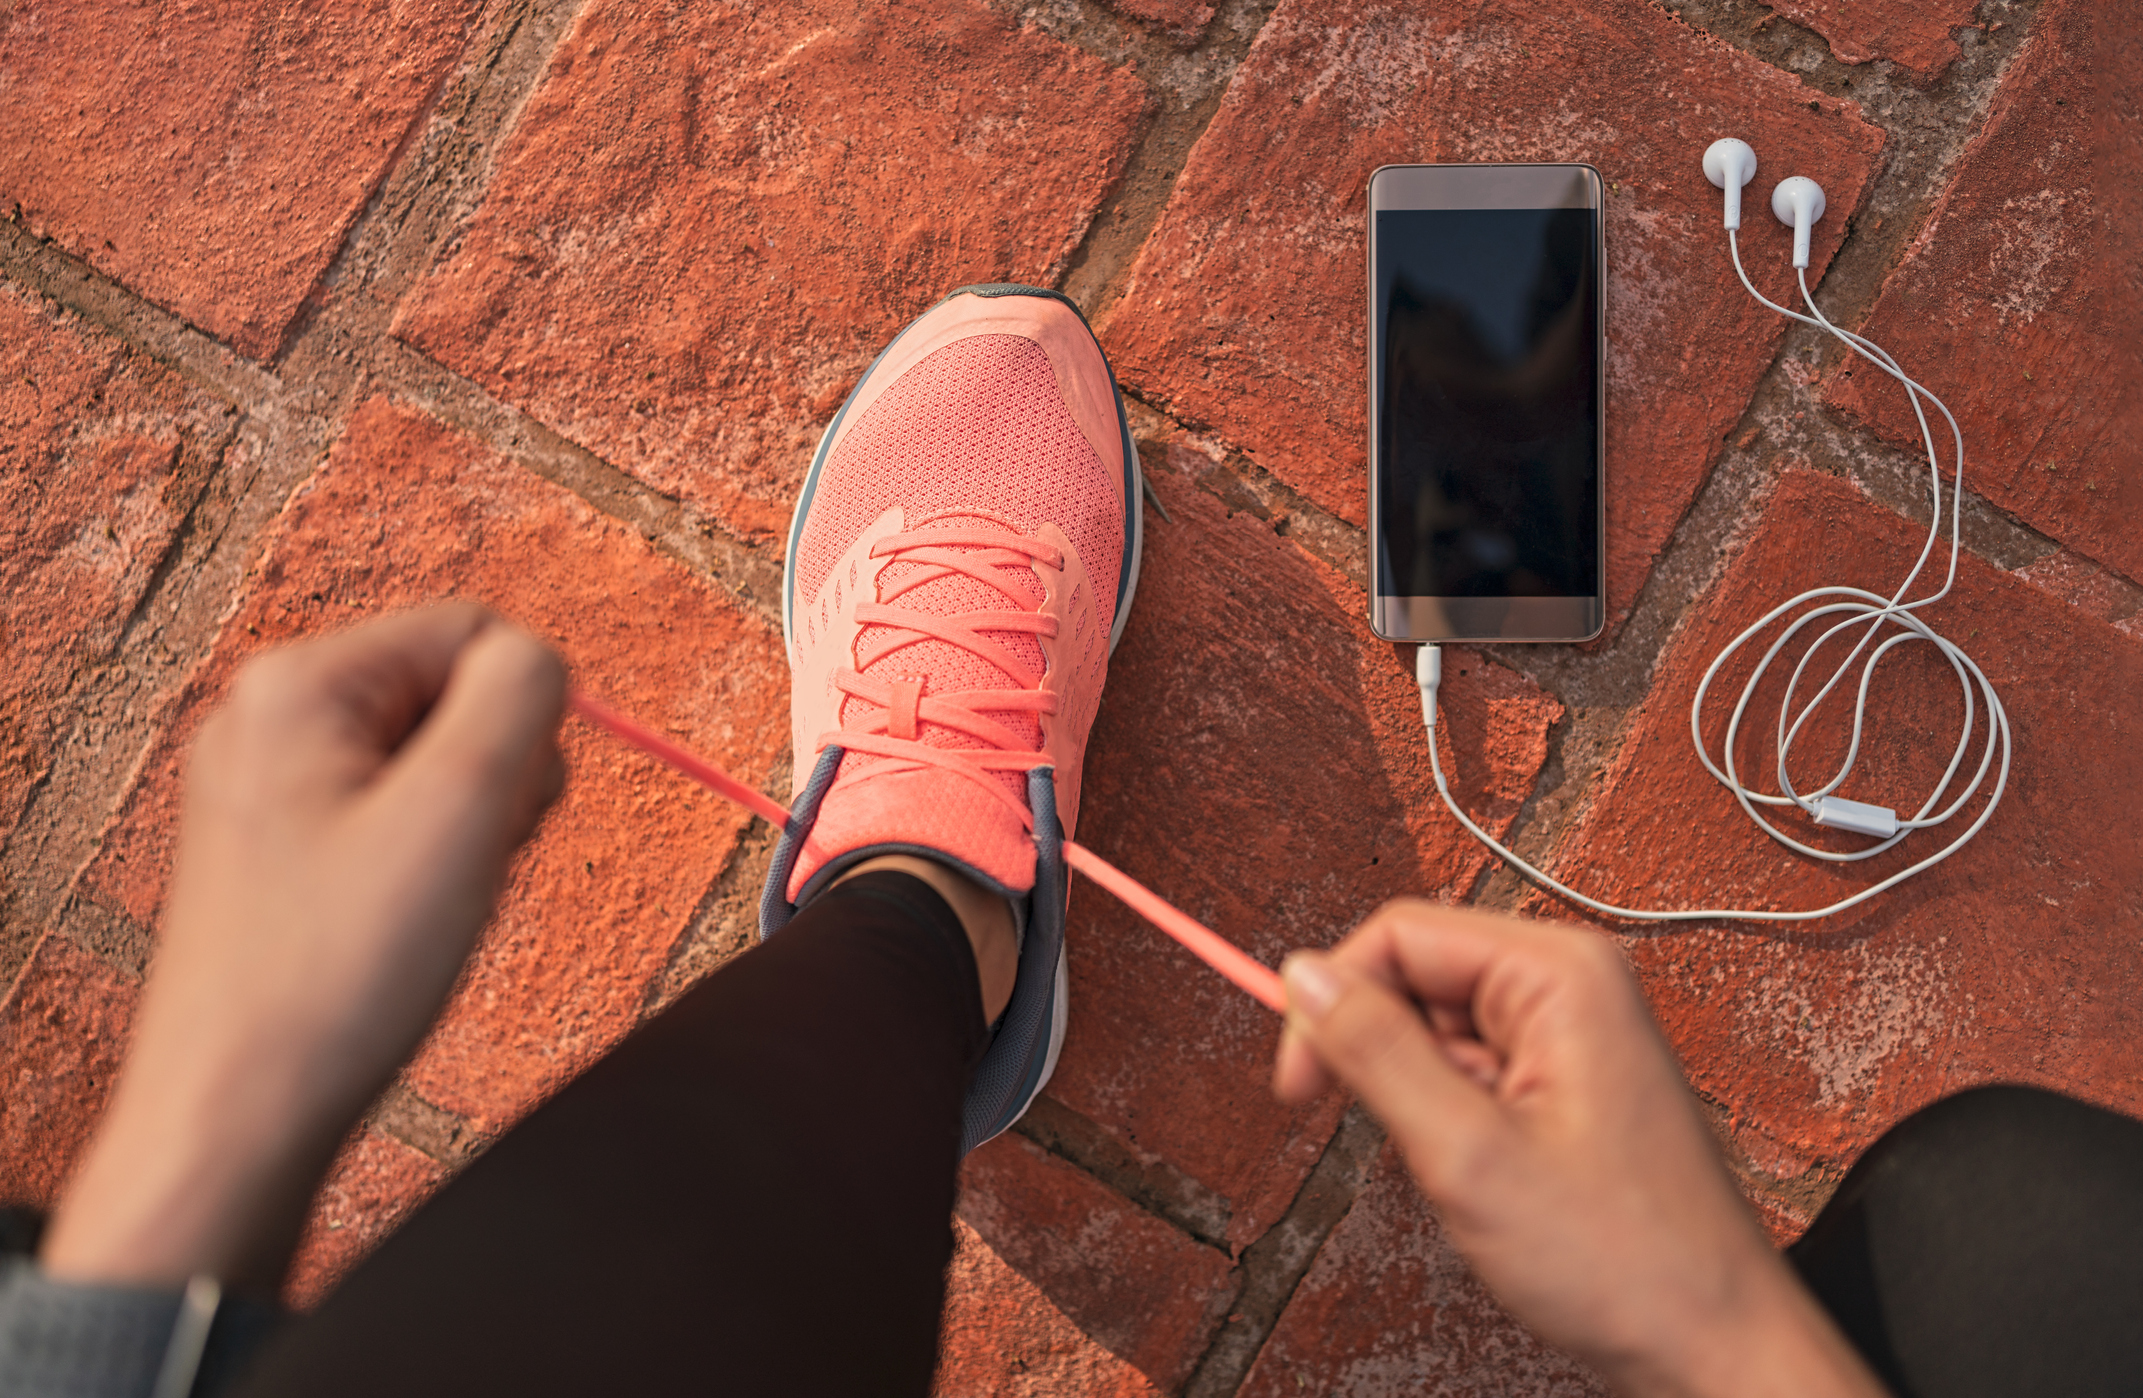 Runner woman tying running shoes laces getting ready for race on run track with smartphone and earphones for music listening on mobile phone. Athlete preparing for cardio training. Feet on ground.